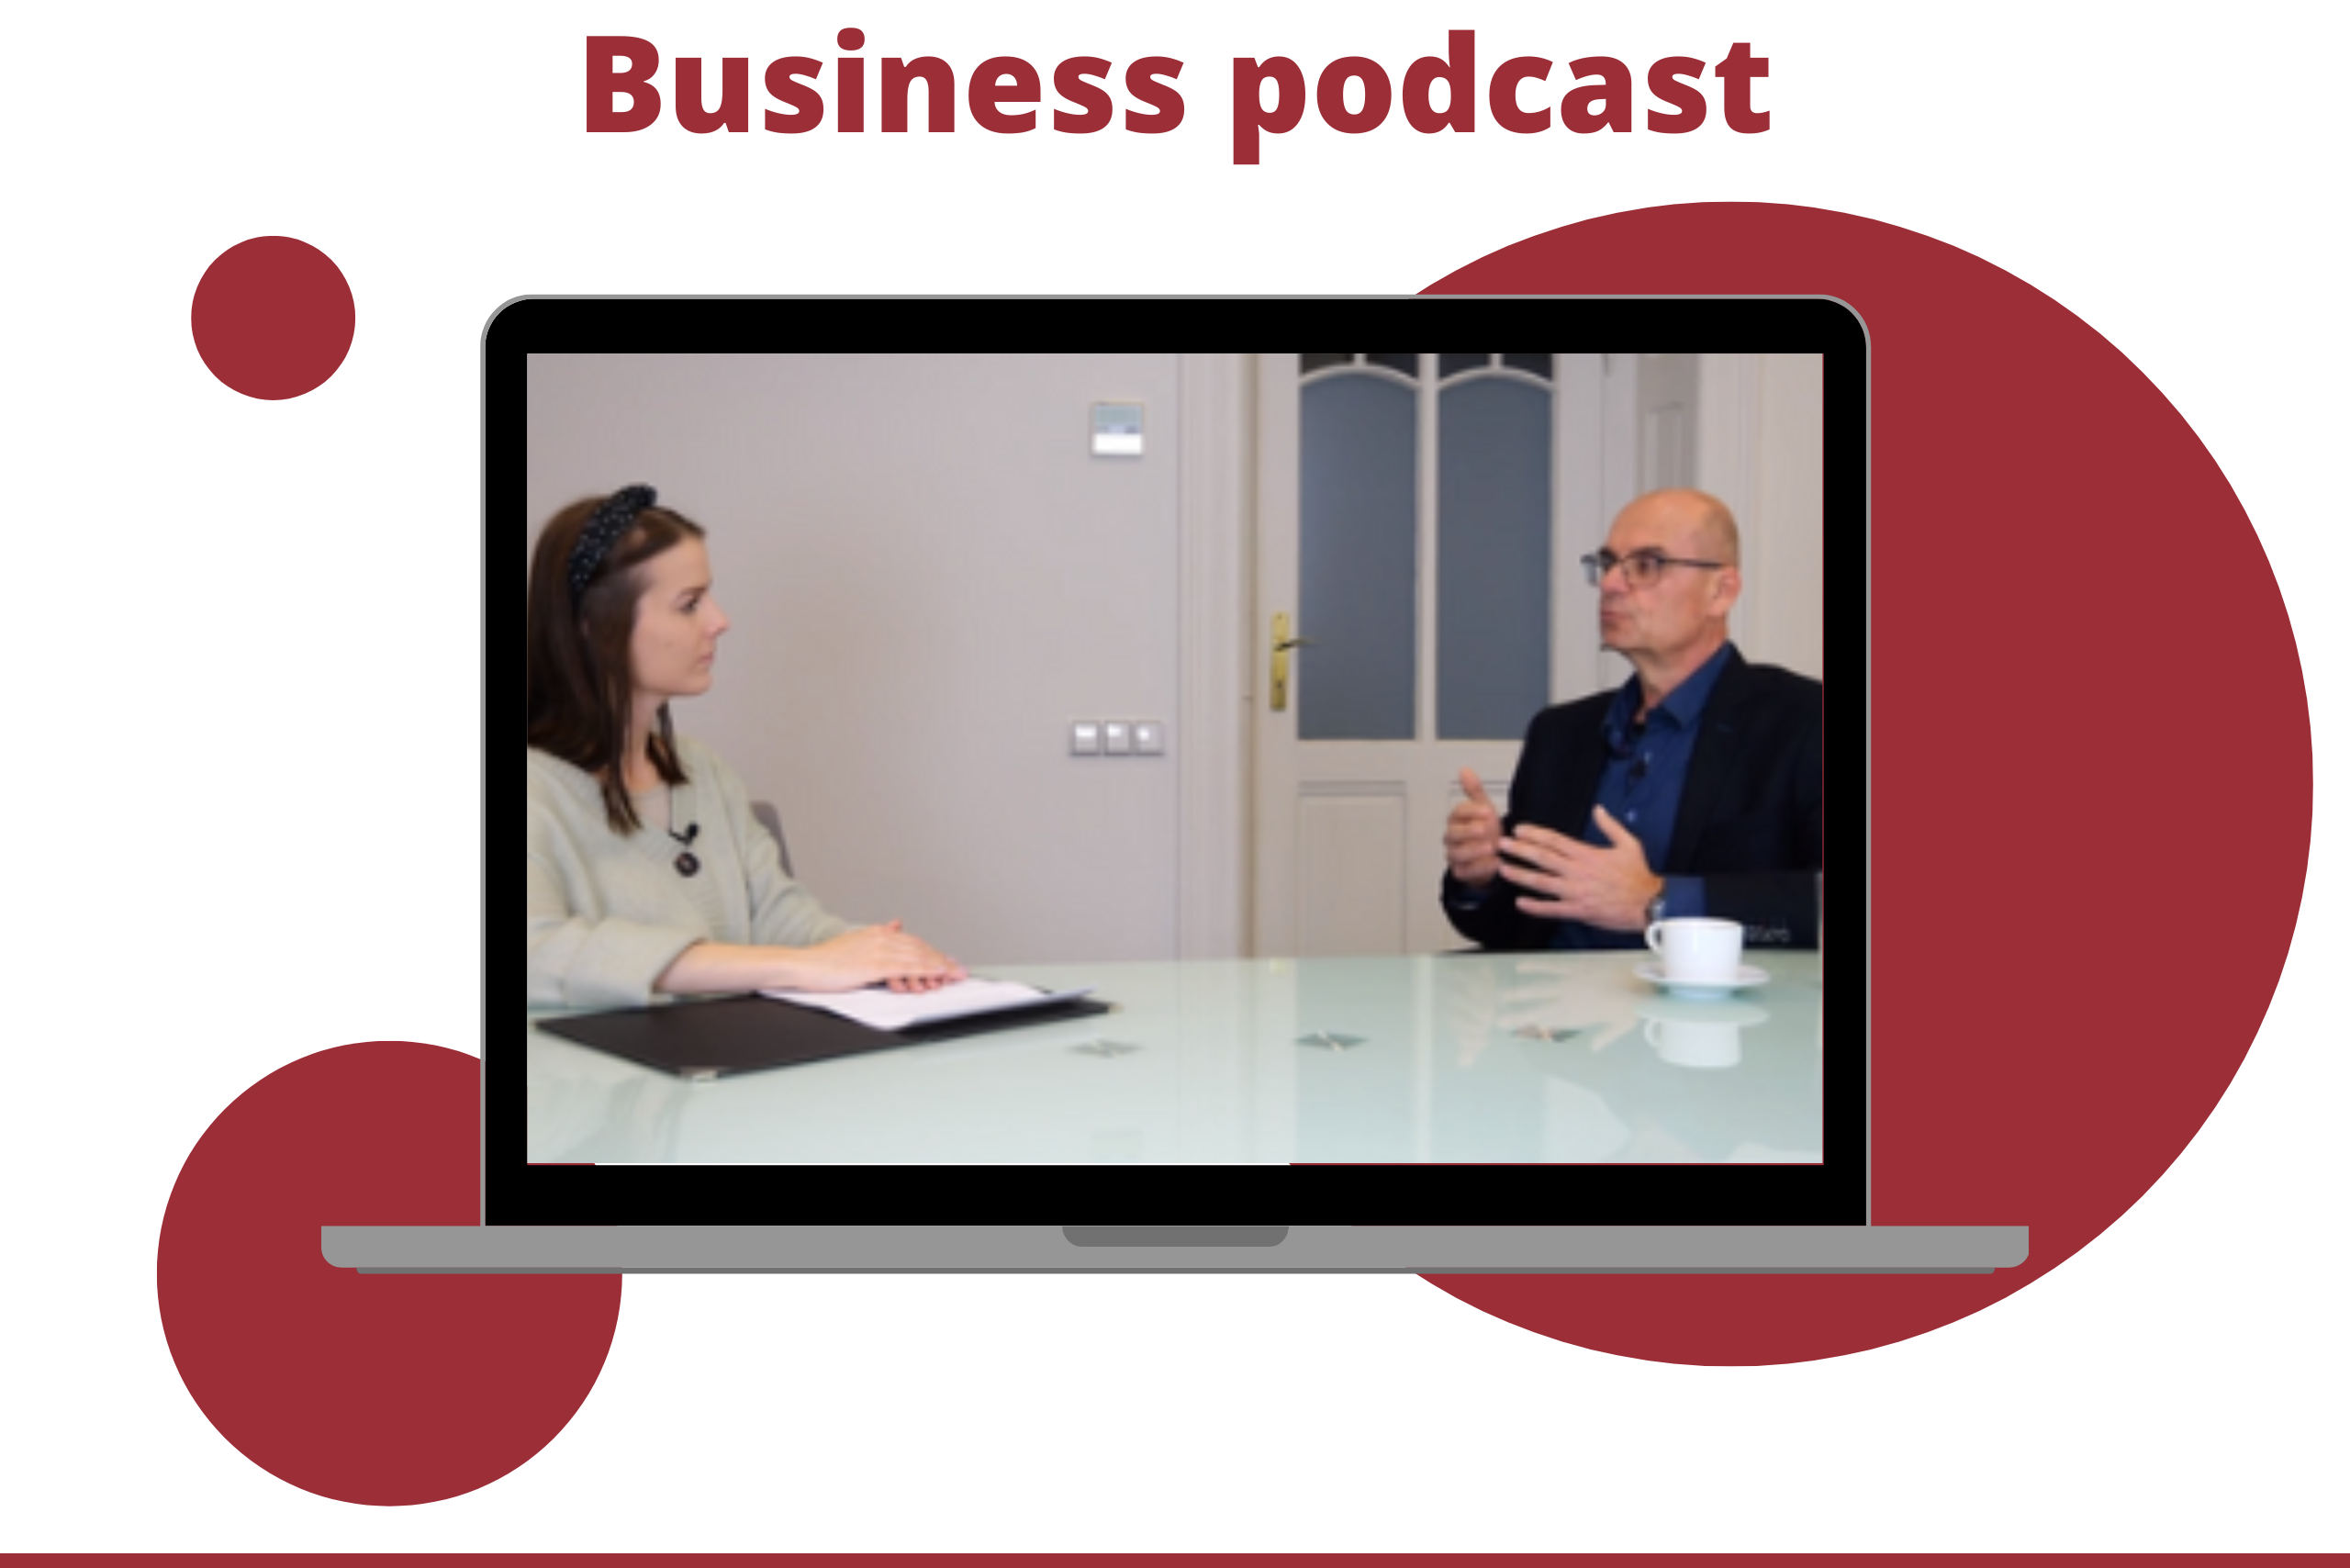 BUSINESS PODCAST